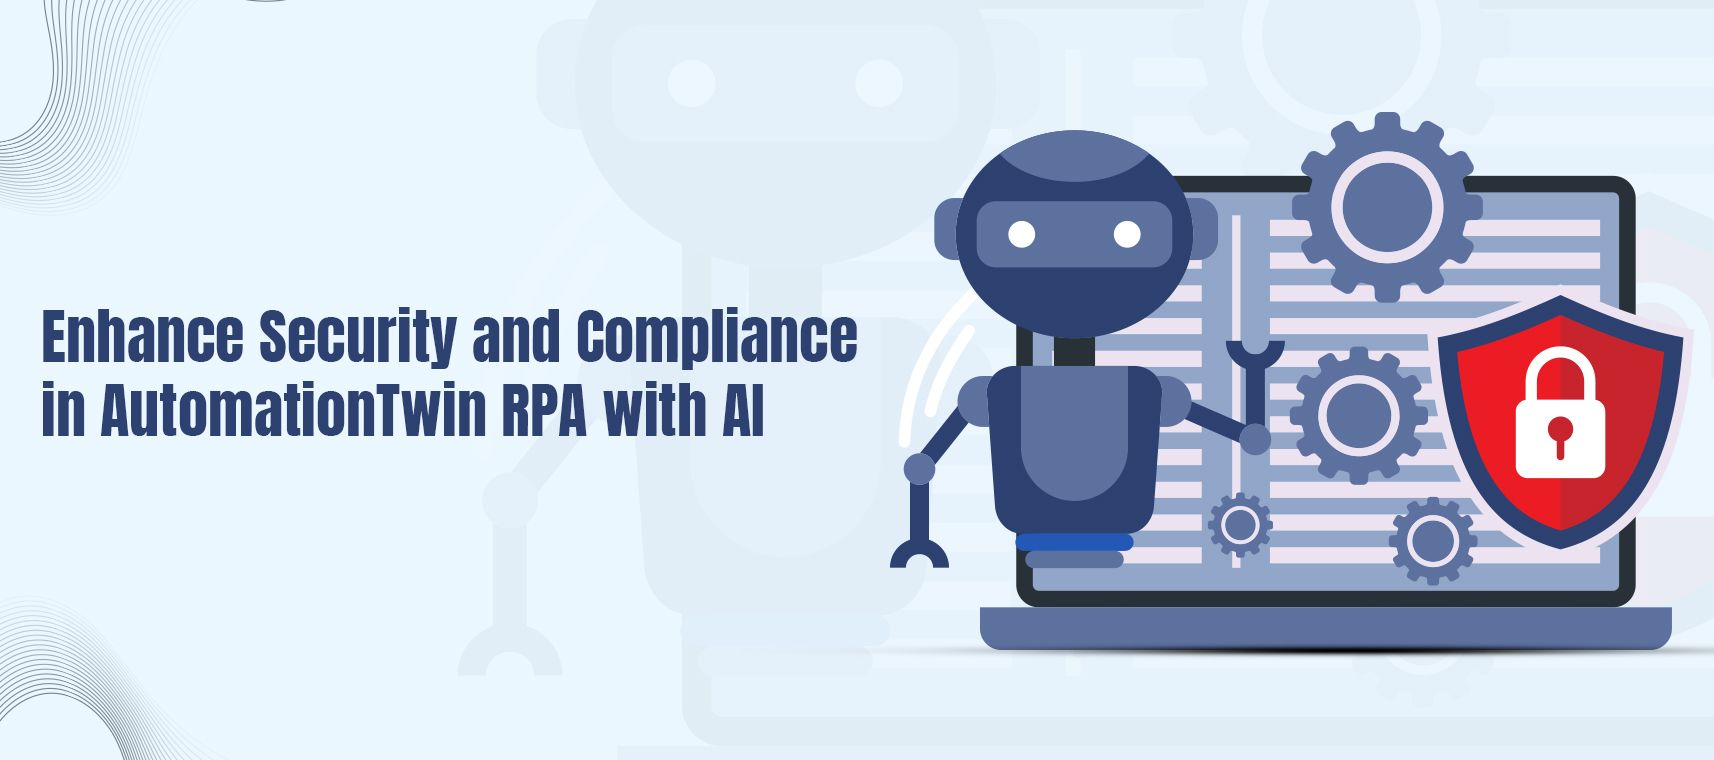 Enhance Security and Compliance in AutomationTwin RPA with AI - TFTus